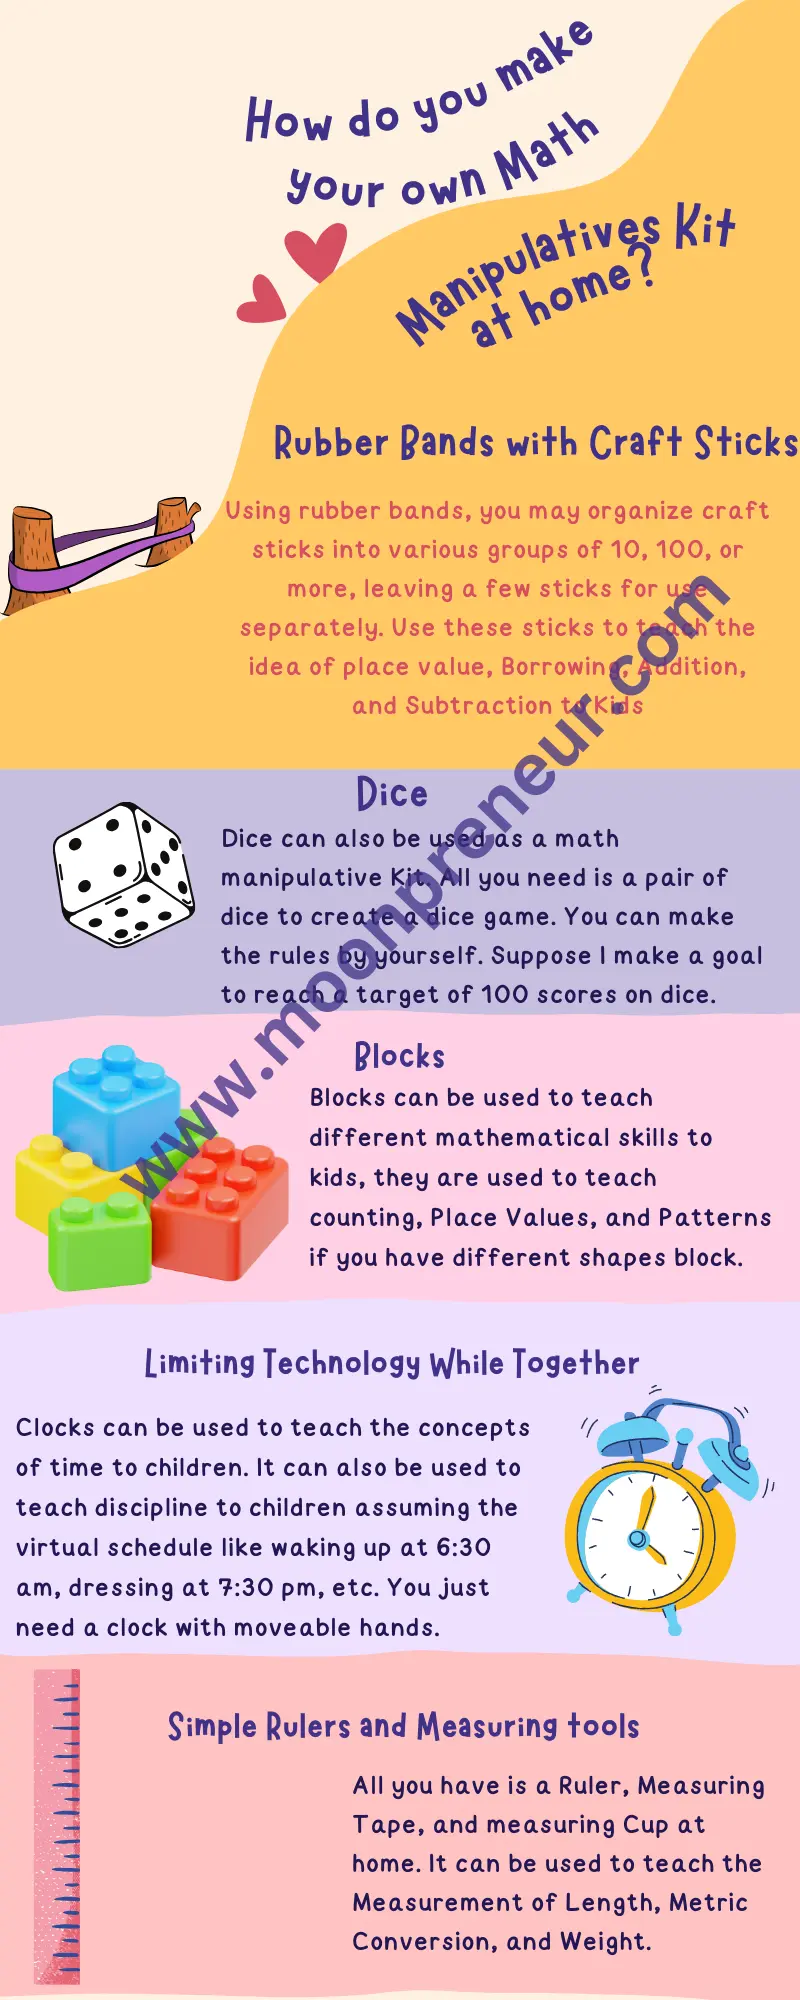 How Do You Make Your Own Math Manipulatives Kit At Your Home